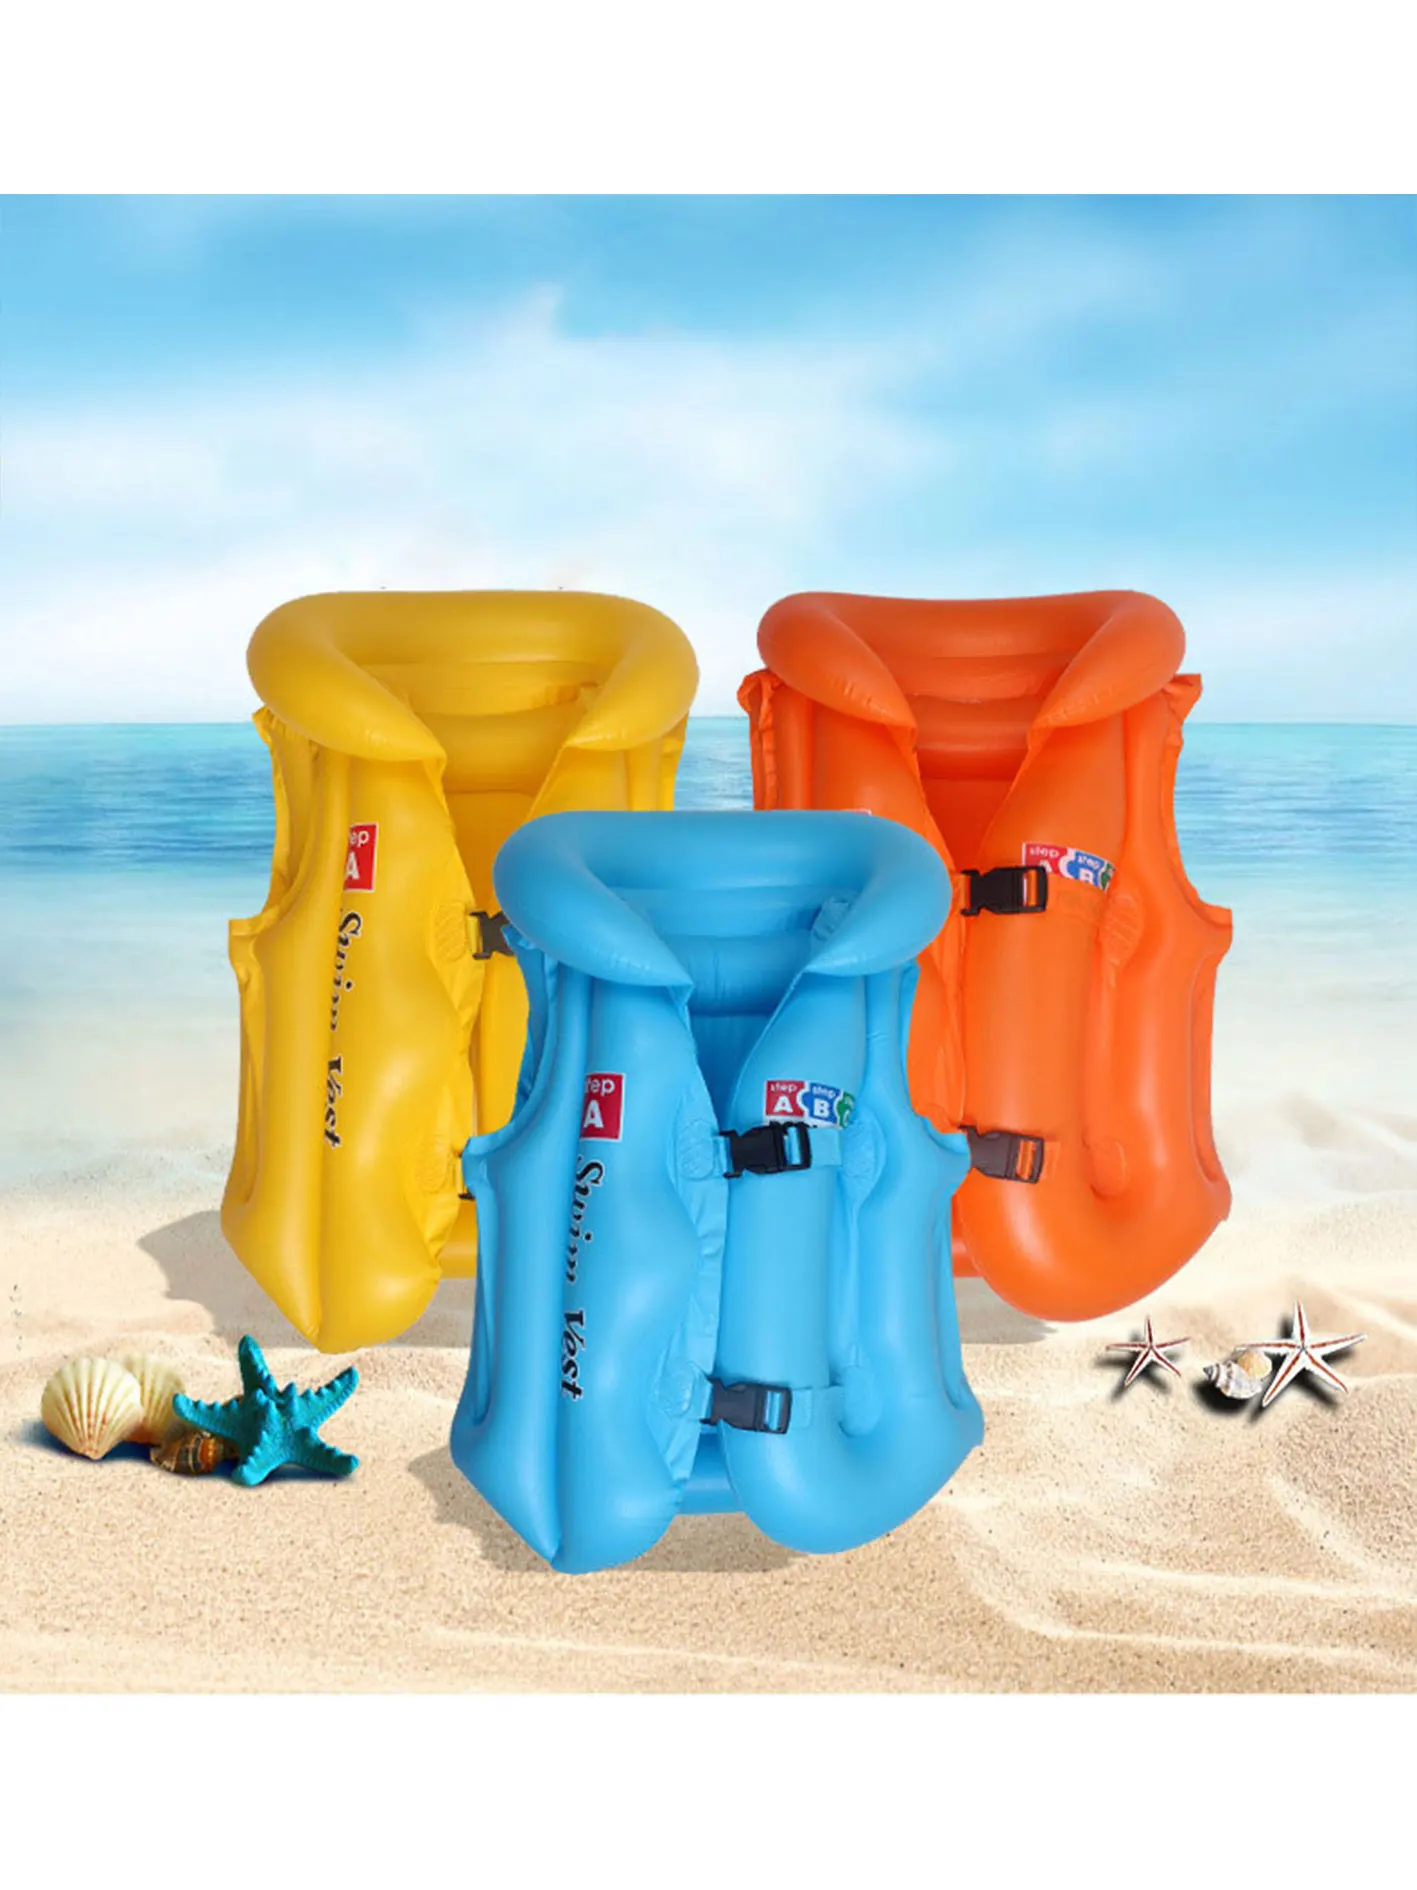 Kids Simple Atmosphere Life Jackets Inflatable Children Swimwear For Water Sport Boating Swimming Pool Accessories janevini new fashin women wedding jackets 2019 faux fur shawls and wraps winter warm bridal cape fur cloak wedding accessories